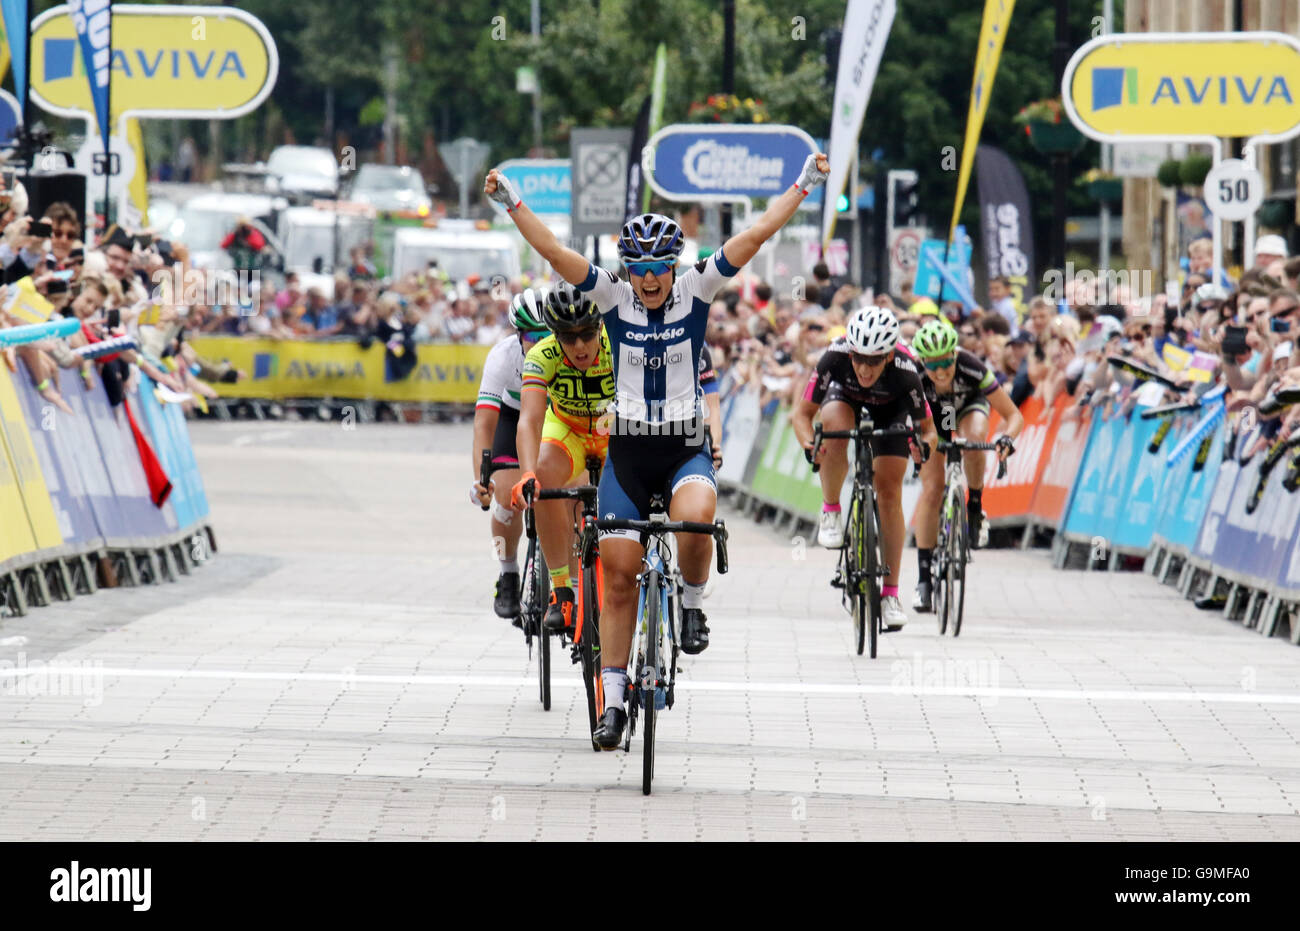 Lotta Lepesto, riding for Bigla Pro Cycling Team, crosses the line to win the final stage of Aviva Women's Tour in Kettering Stock Photo